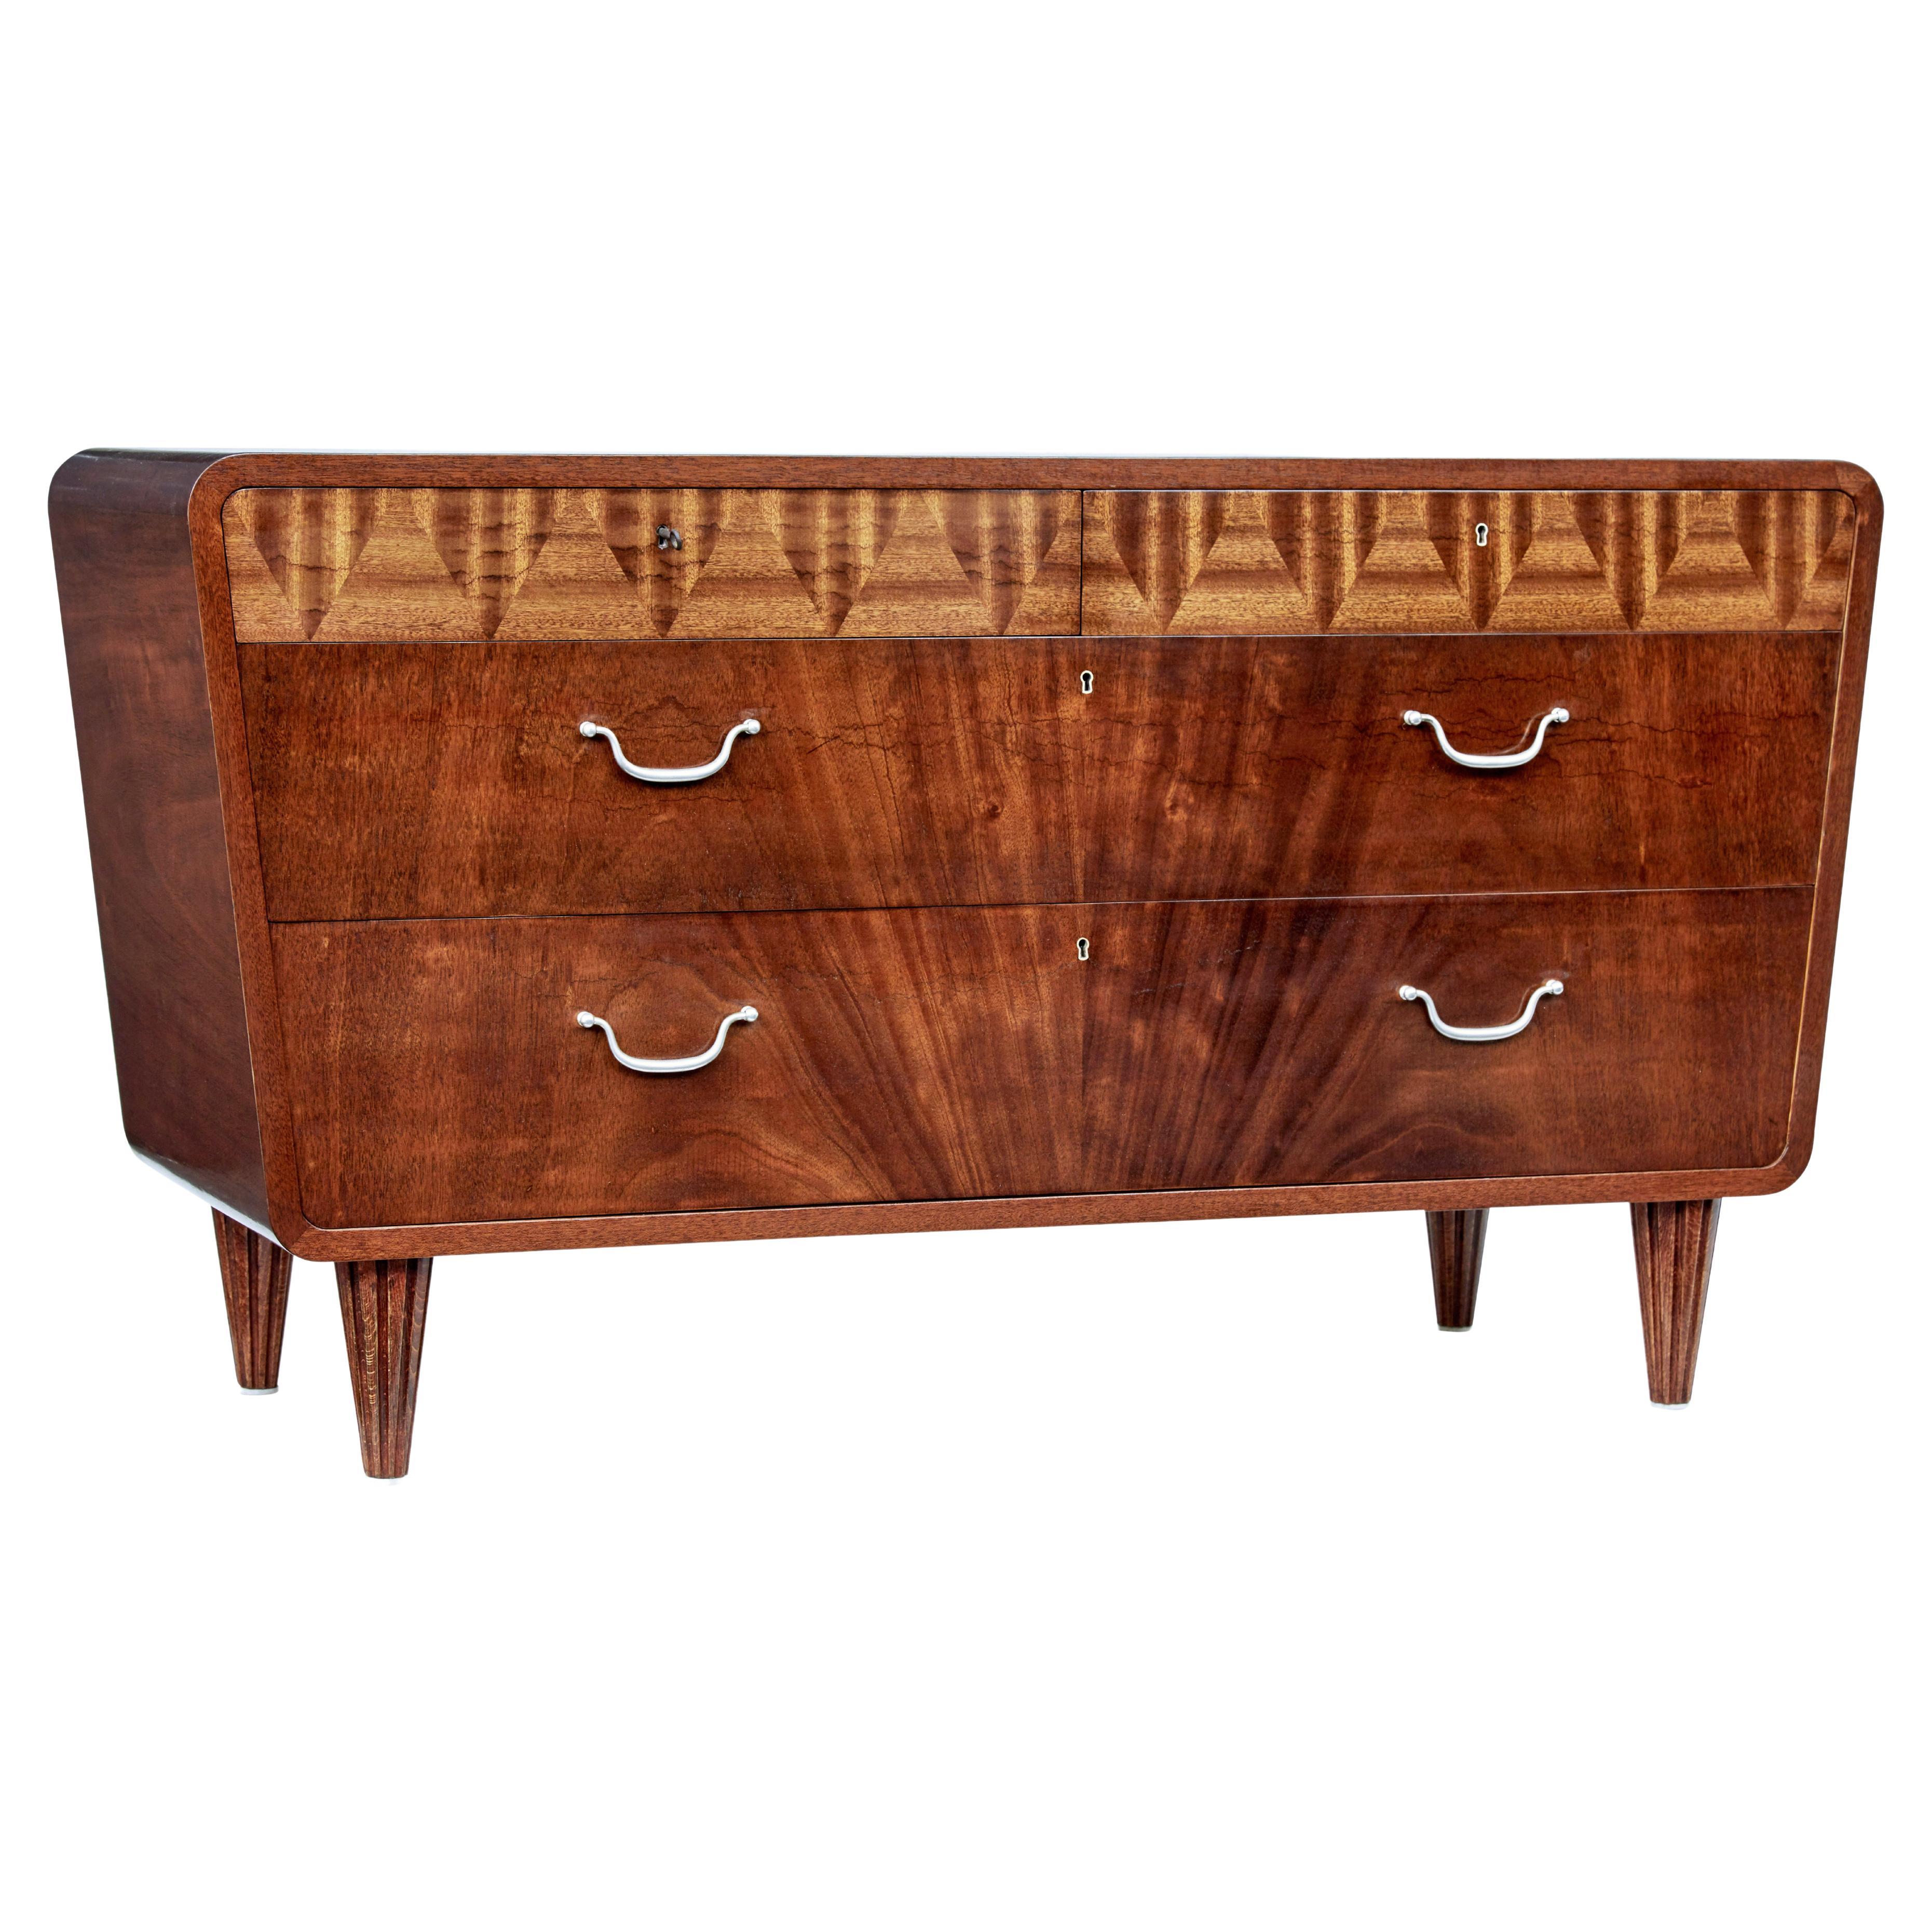 Mid 20th century Scandinavian modern mahogany chest of drawers For Sale